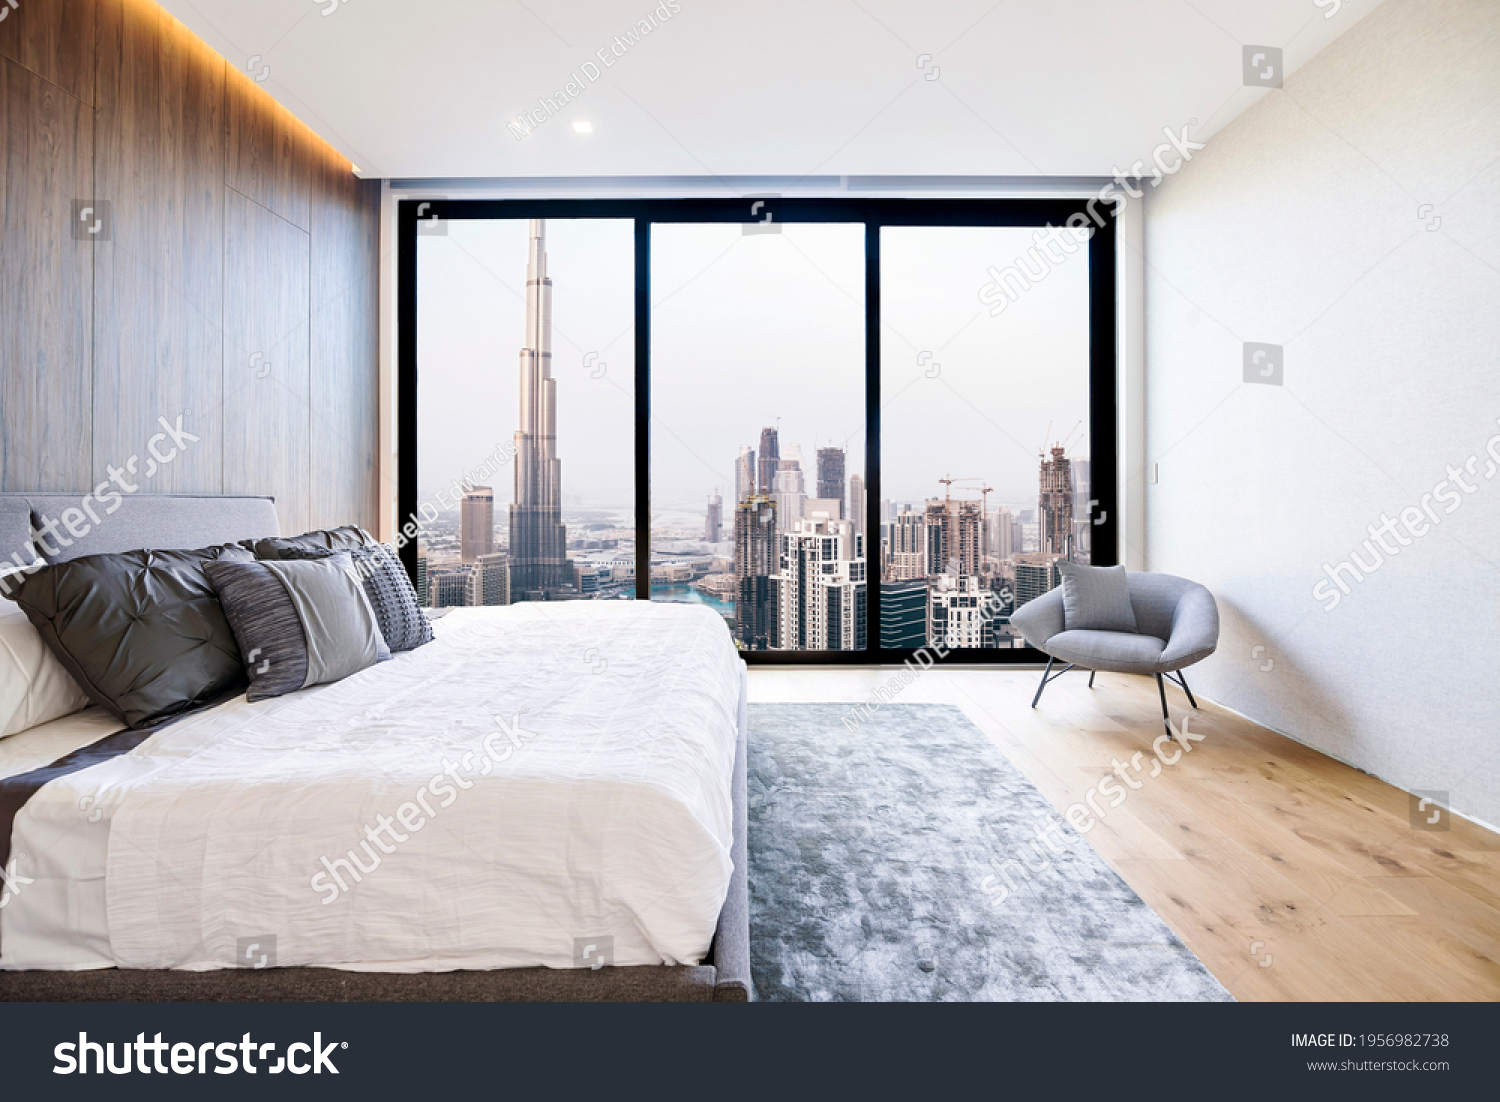 Modern and luxurious bedroom with white ceiling and wood accents with views of tall building and downtown Dubai skyline. Condo or Hotel accomodation. #1956982738